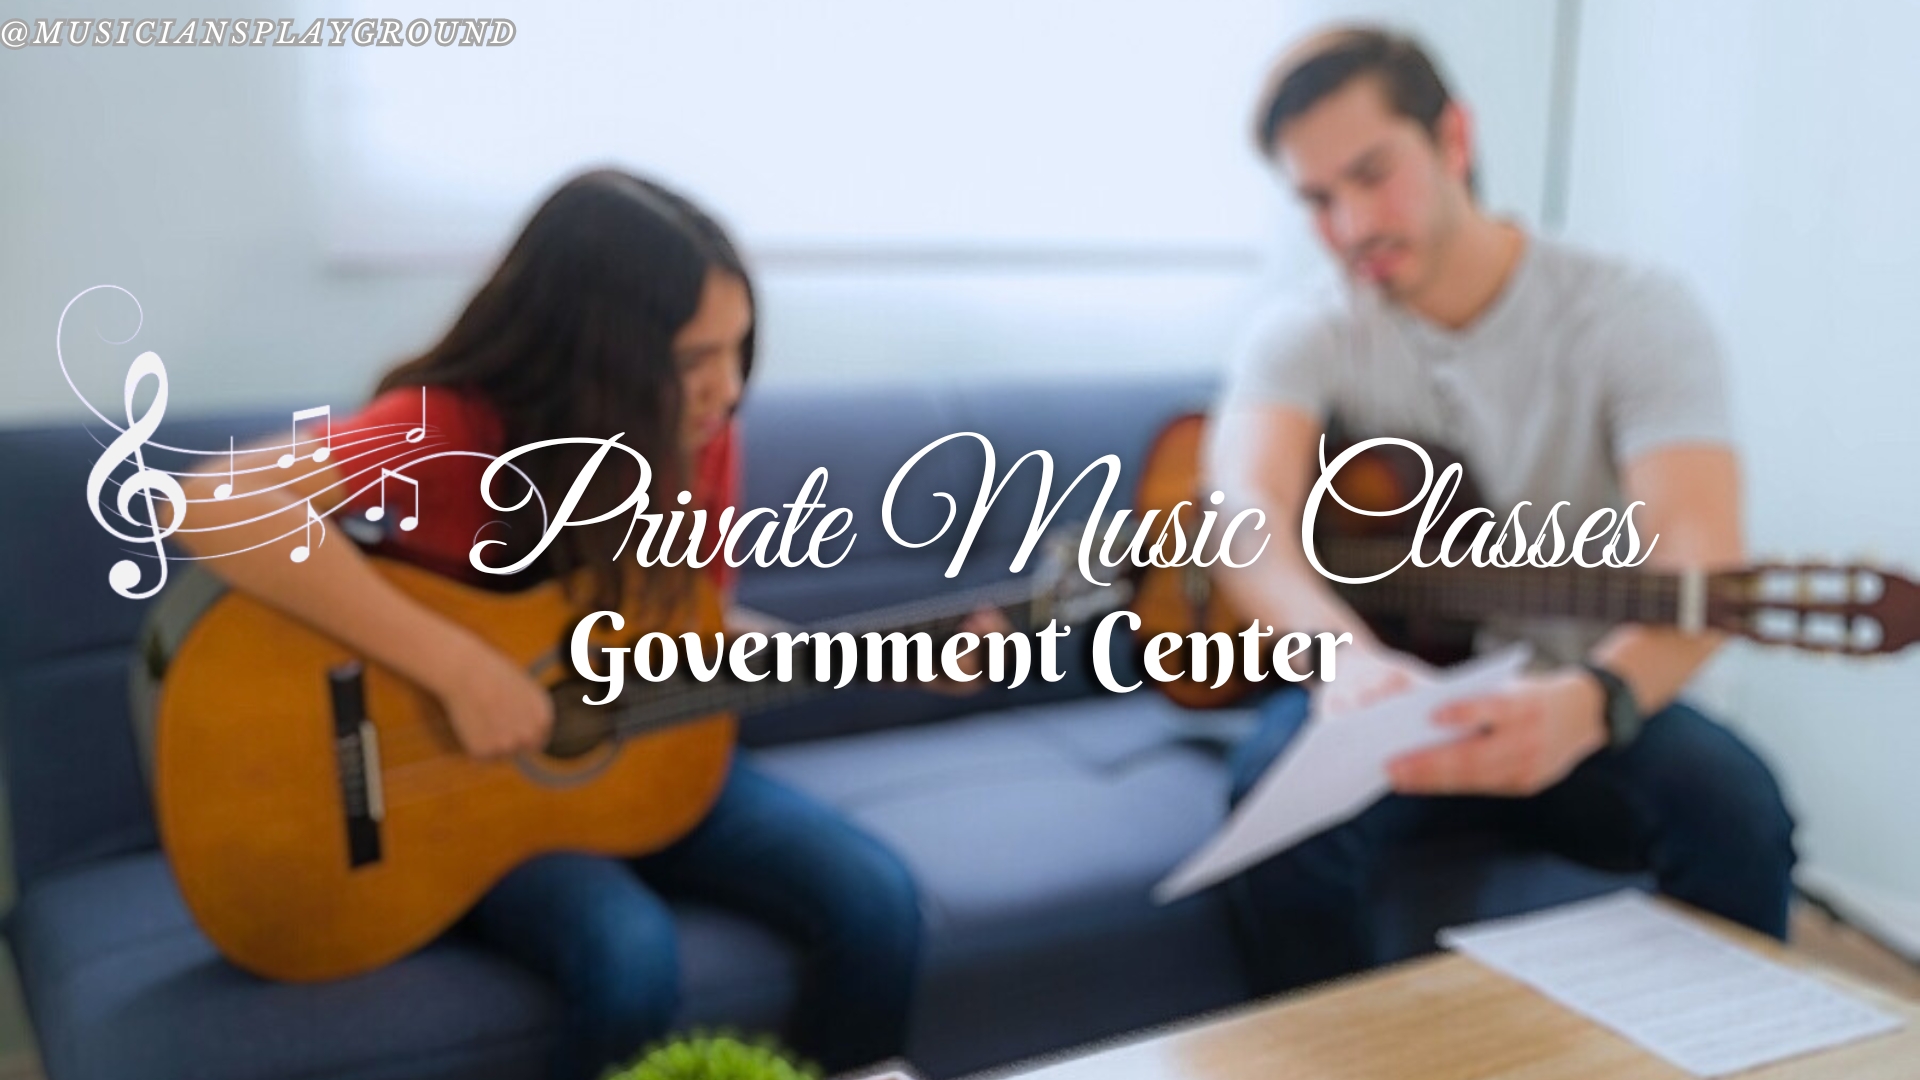 Welcome to Government Center: The Perfect Place for Private Music Lessons